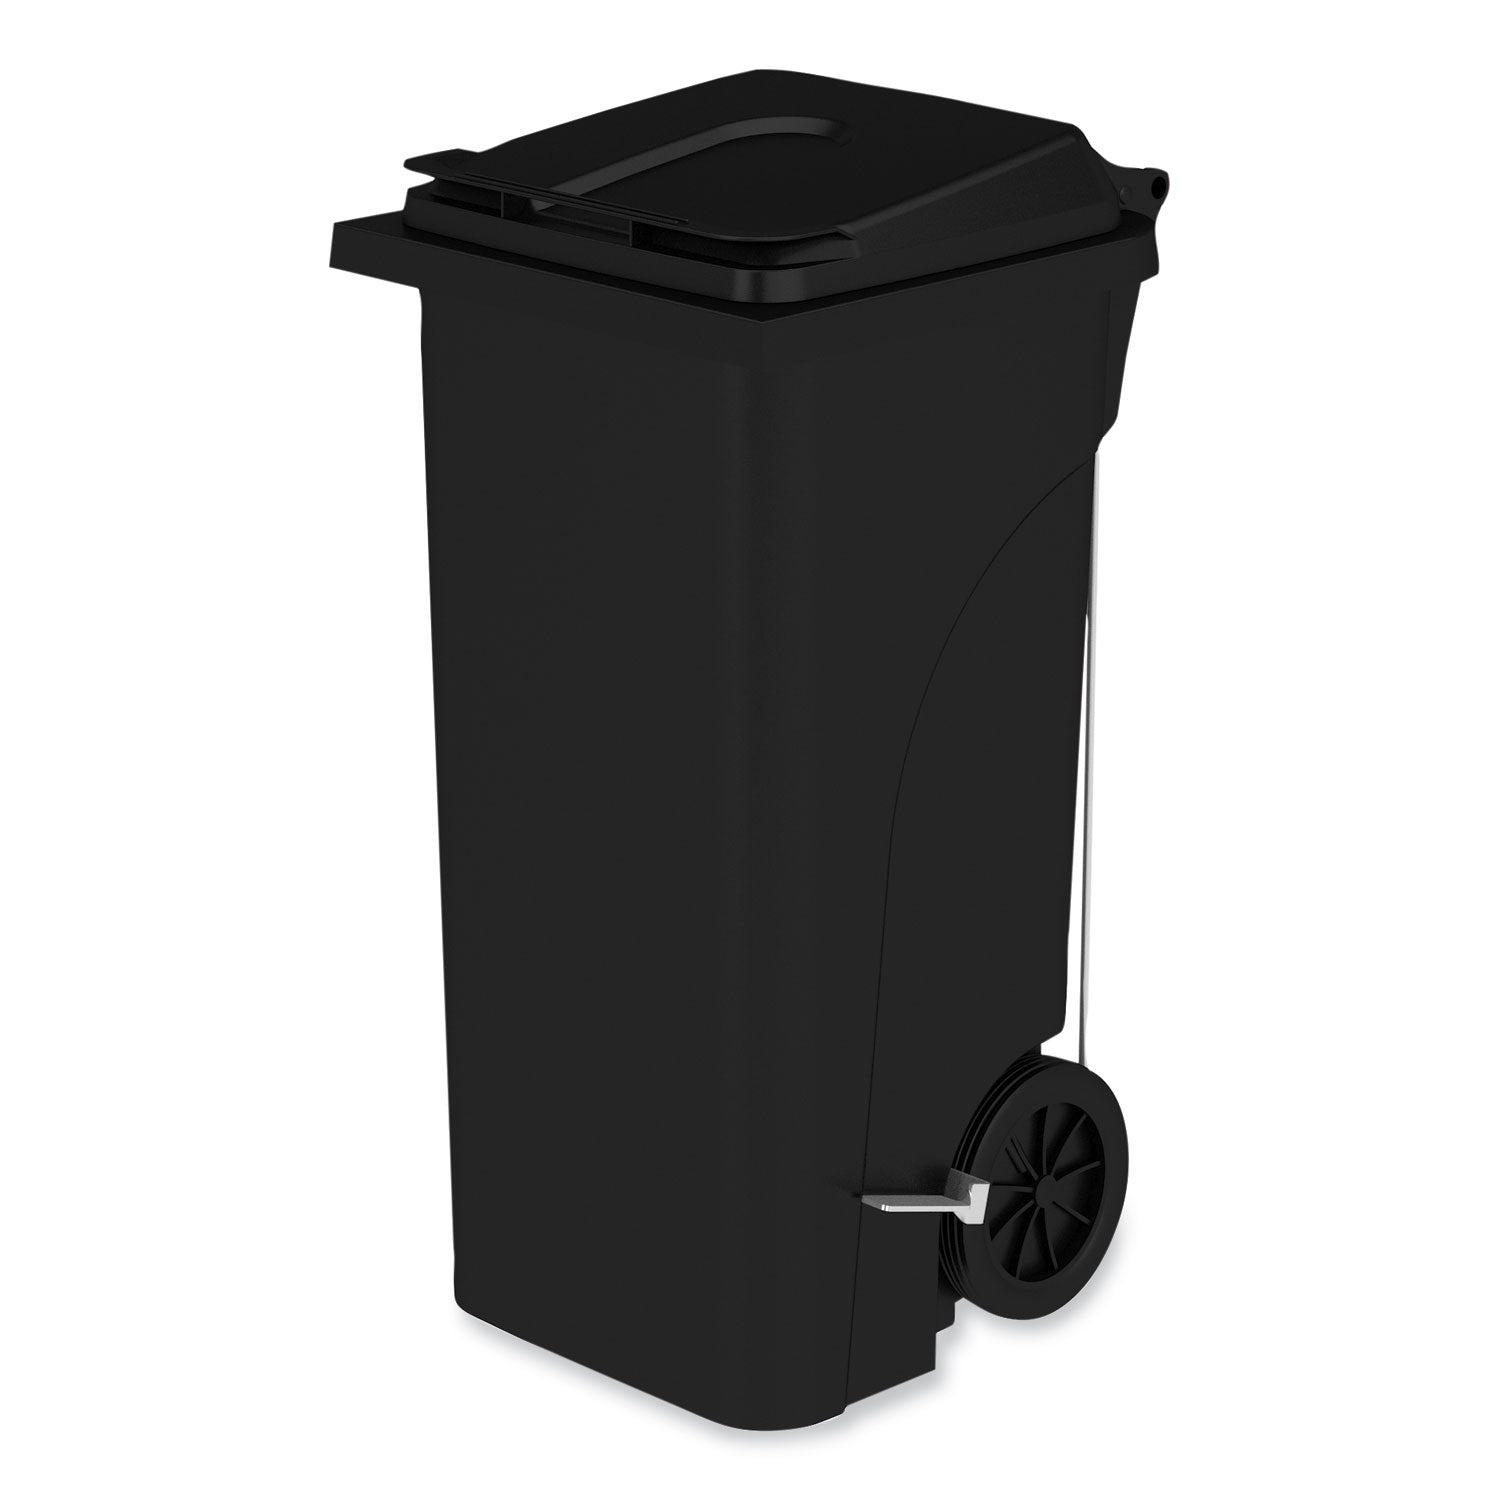 Safco 32 Gallon Plastic Step-On Receptacle - 32 gal Capacity - Easy to Clean, Foot Pedal, Lightweight, Handle, Wheels, Mobility - 37" Height x 21.3" Width x 20" Depth - Plastic - Black - 1 Carton - 1